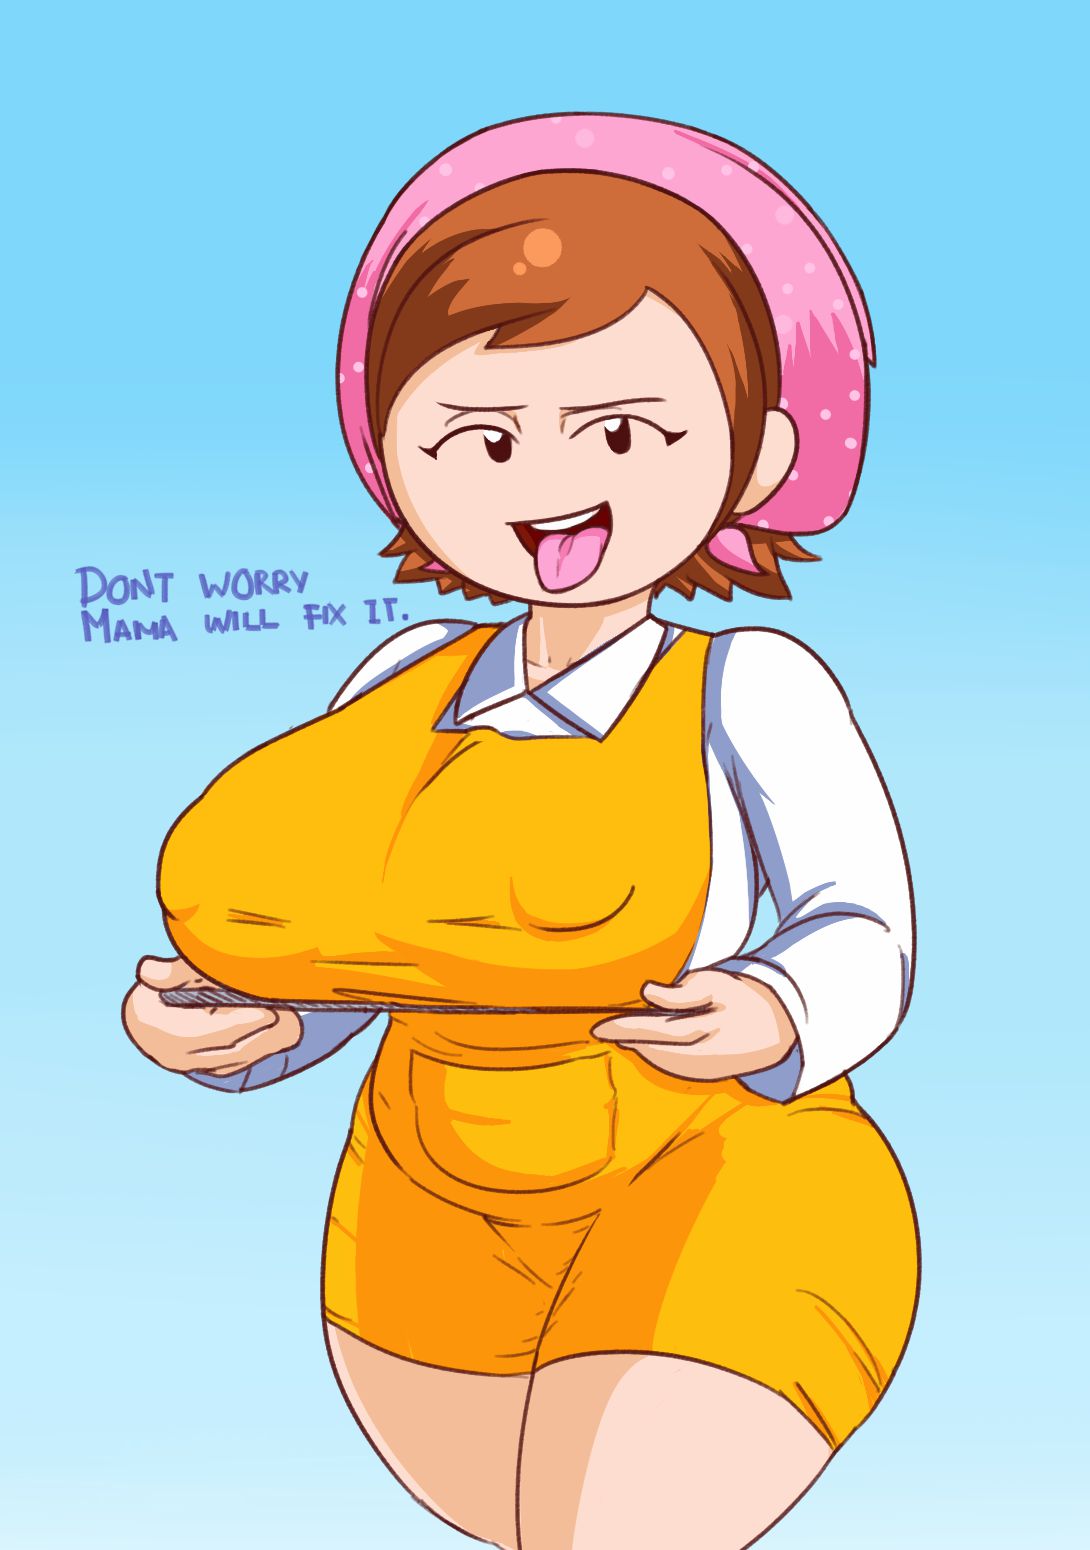 Cooking Mama 1